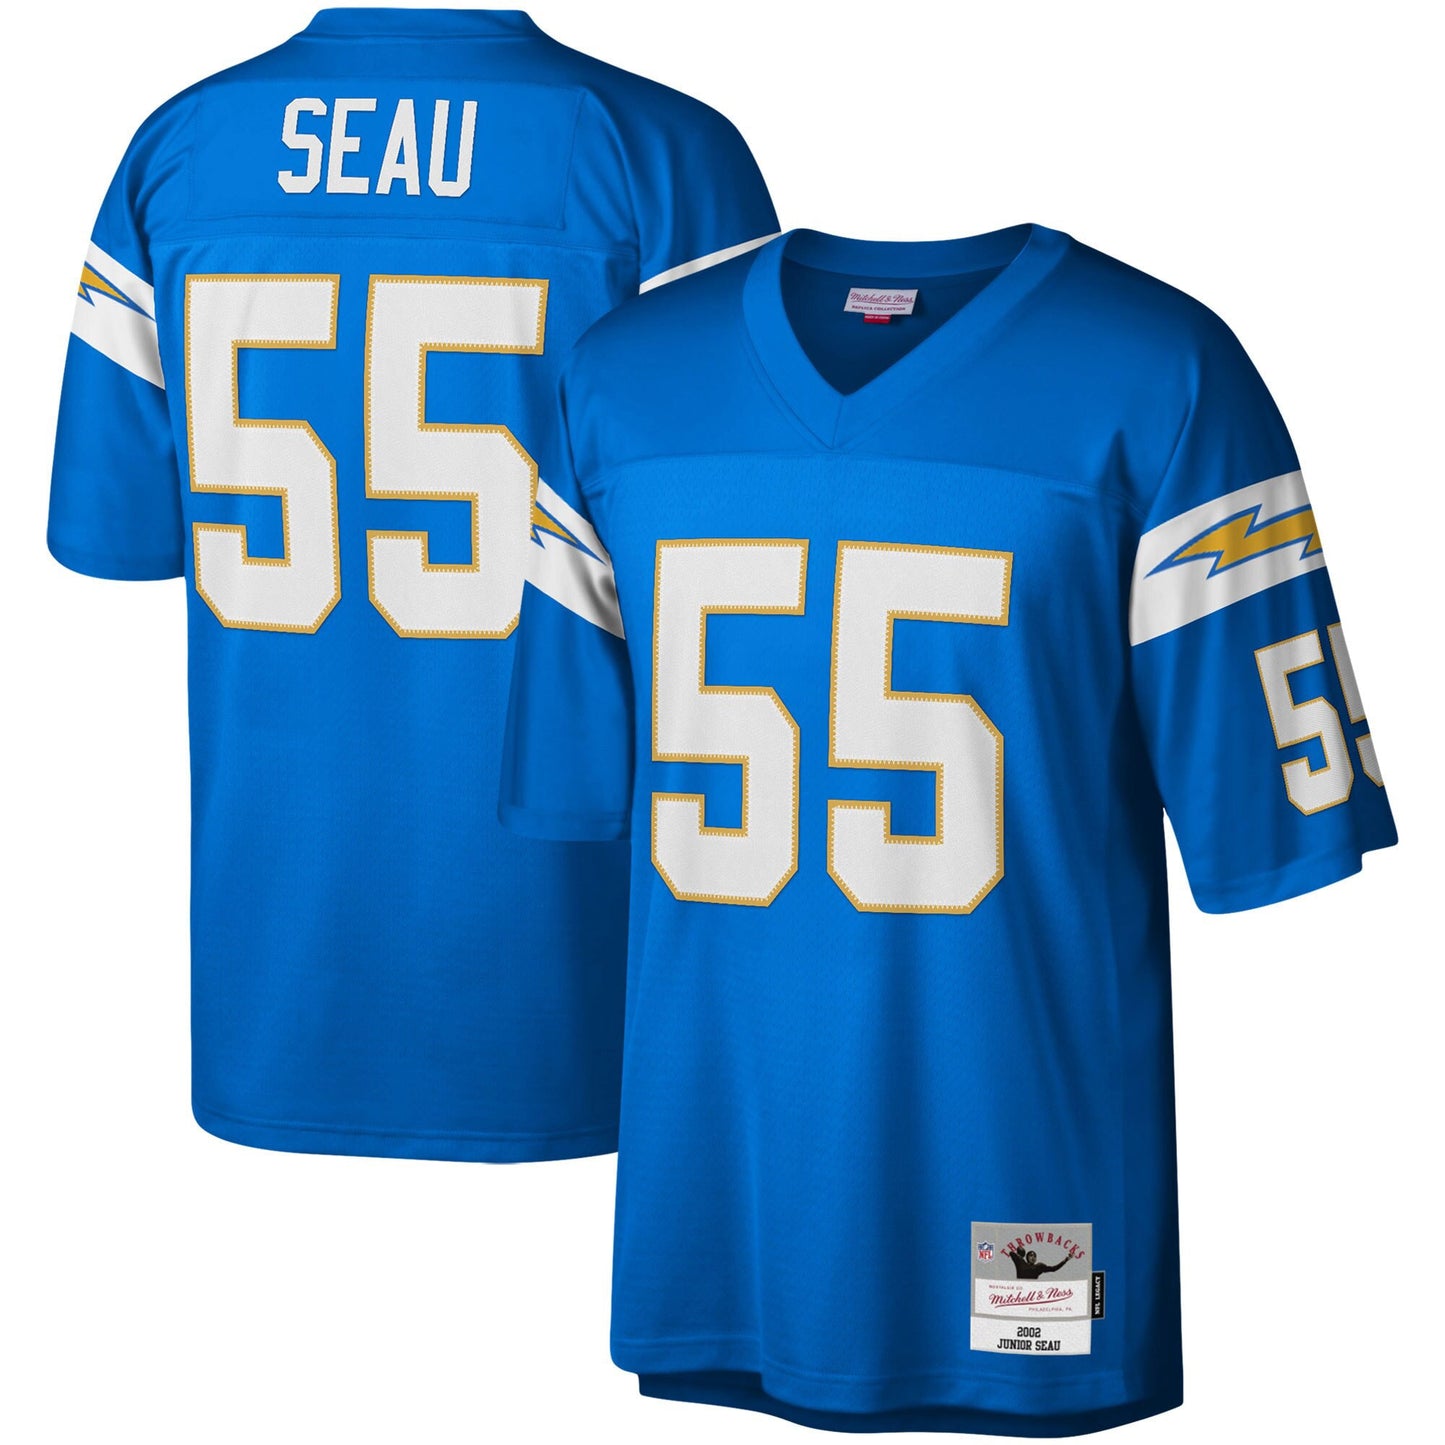 Junior Seau Los Angeles Chargers Mitchell & Ness Big & Tall 2002 Retired Player Replica Jersey - Powder Blue